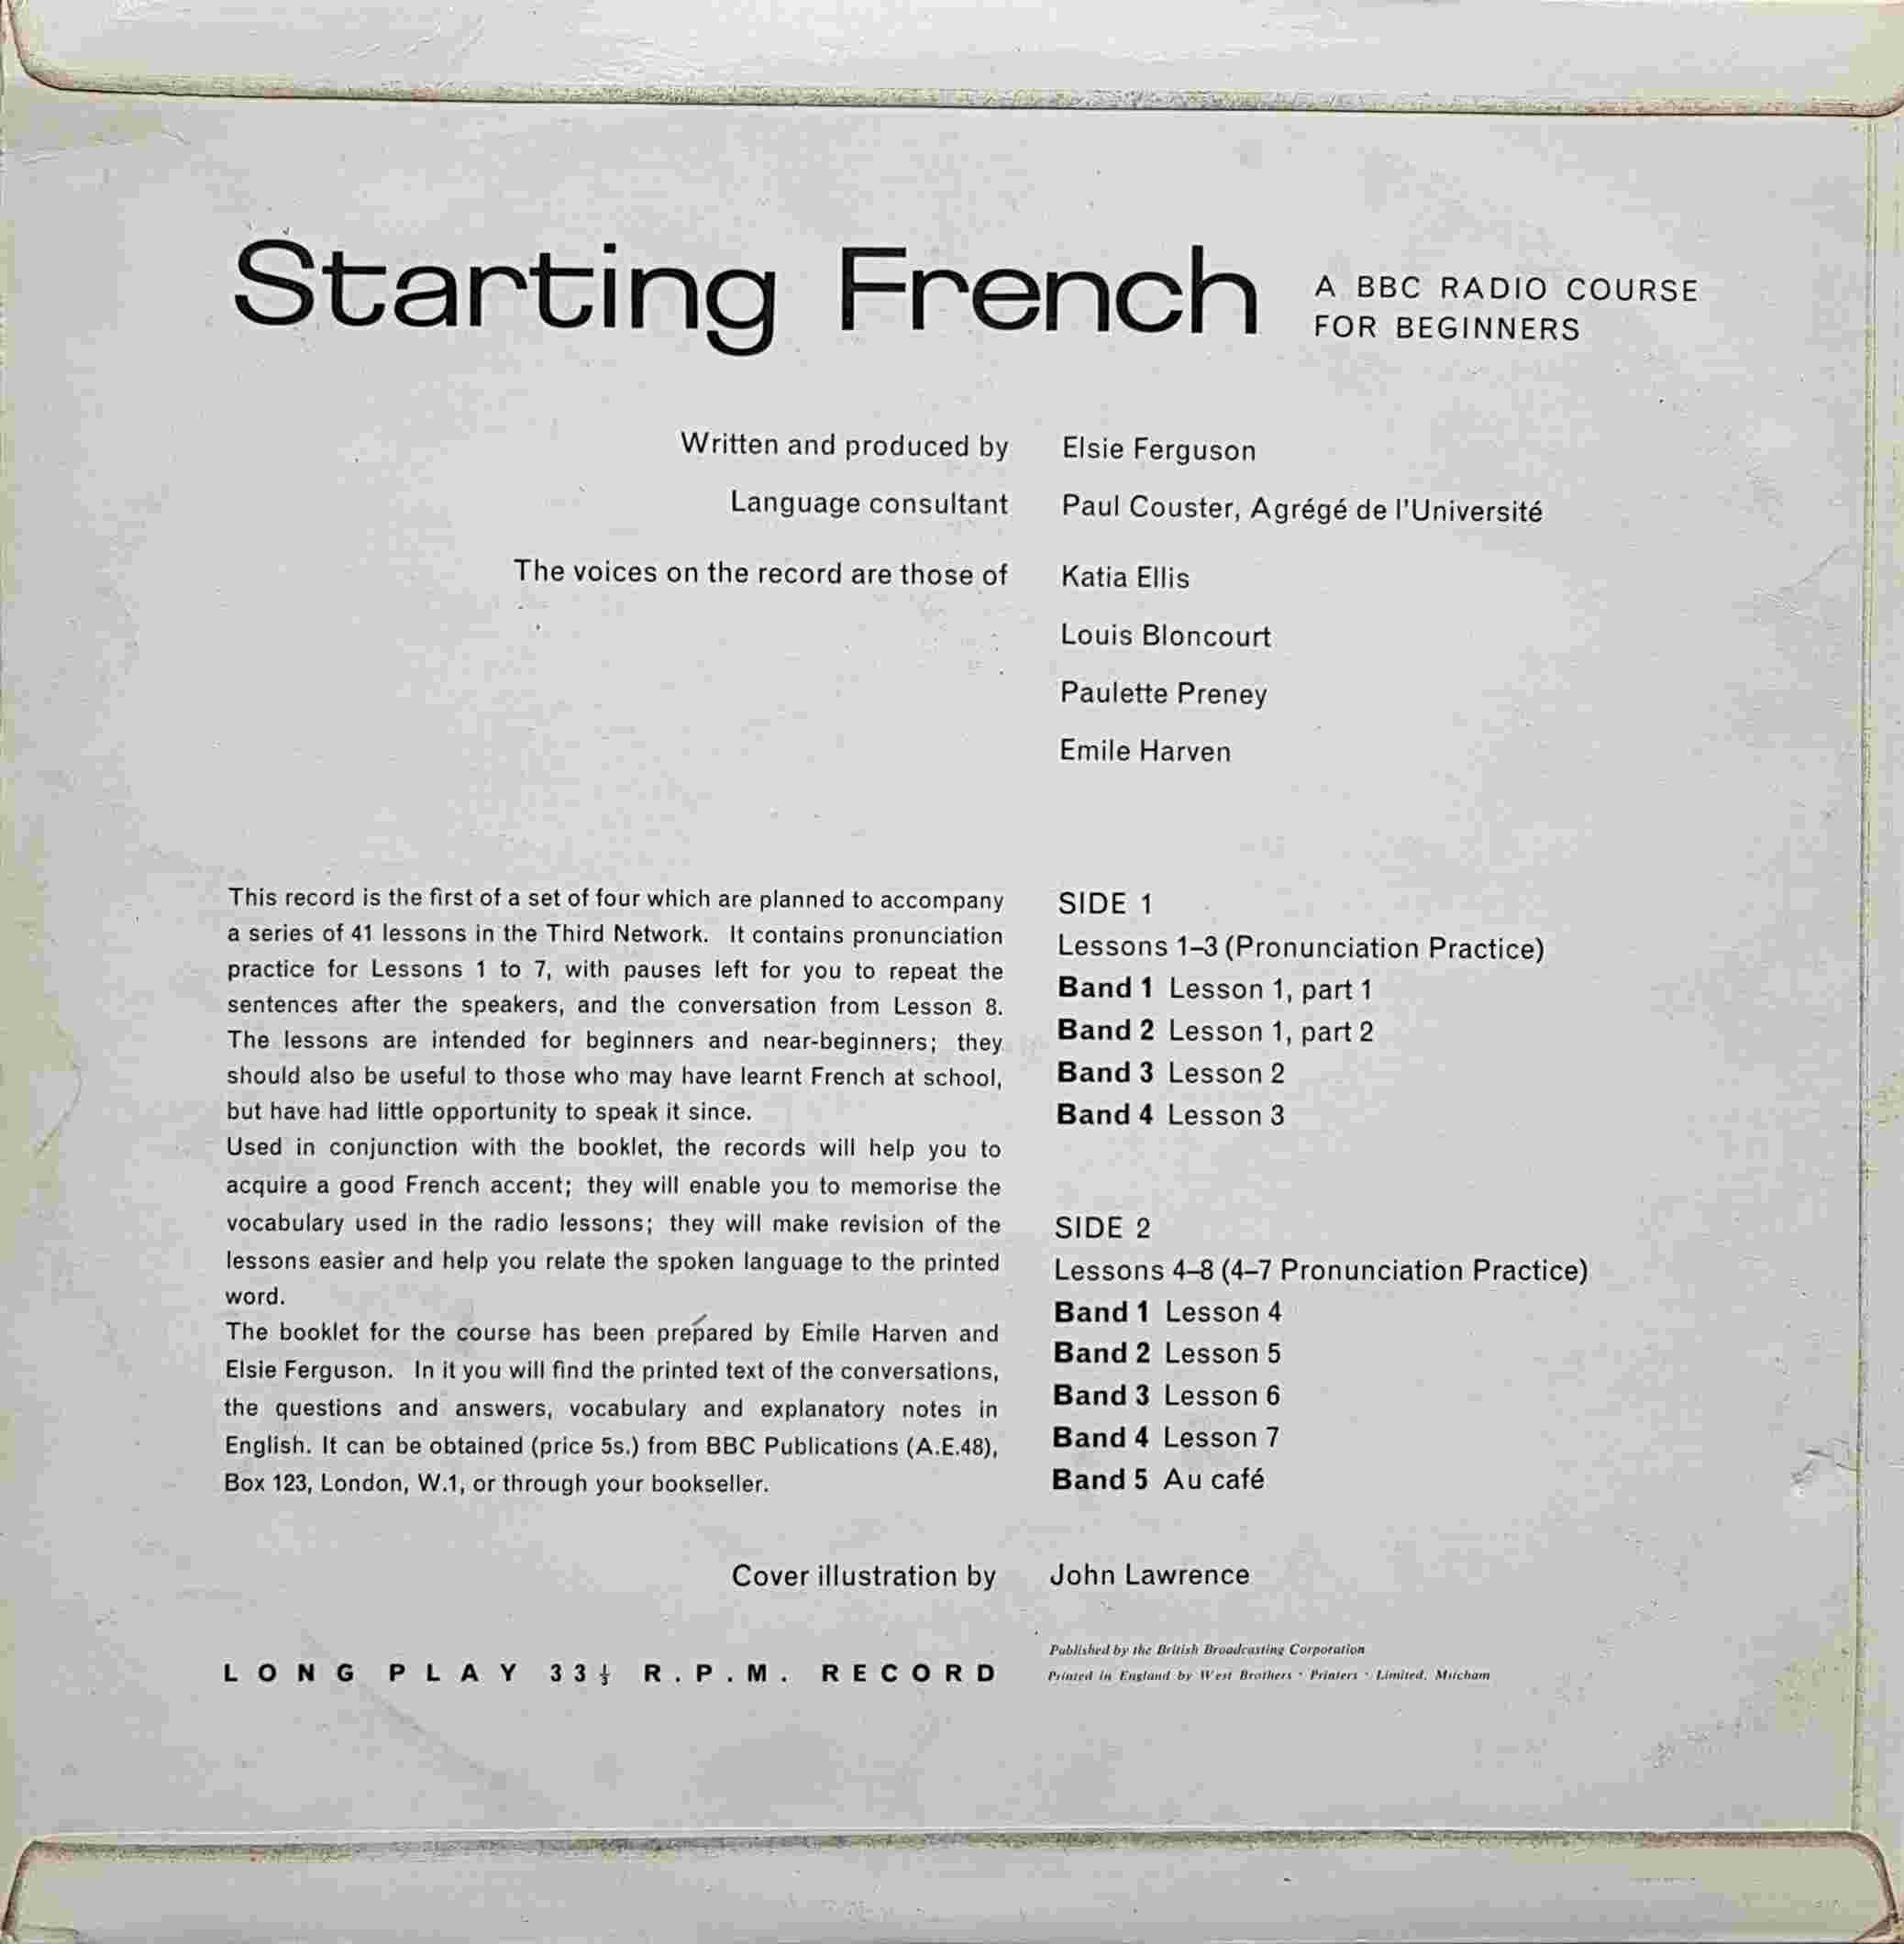 Picture of OP 17/18 Starting French - Parts 1 - 8 by artist Elsie Ferguson from the BBC records and Tapes library